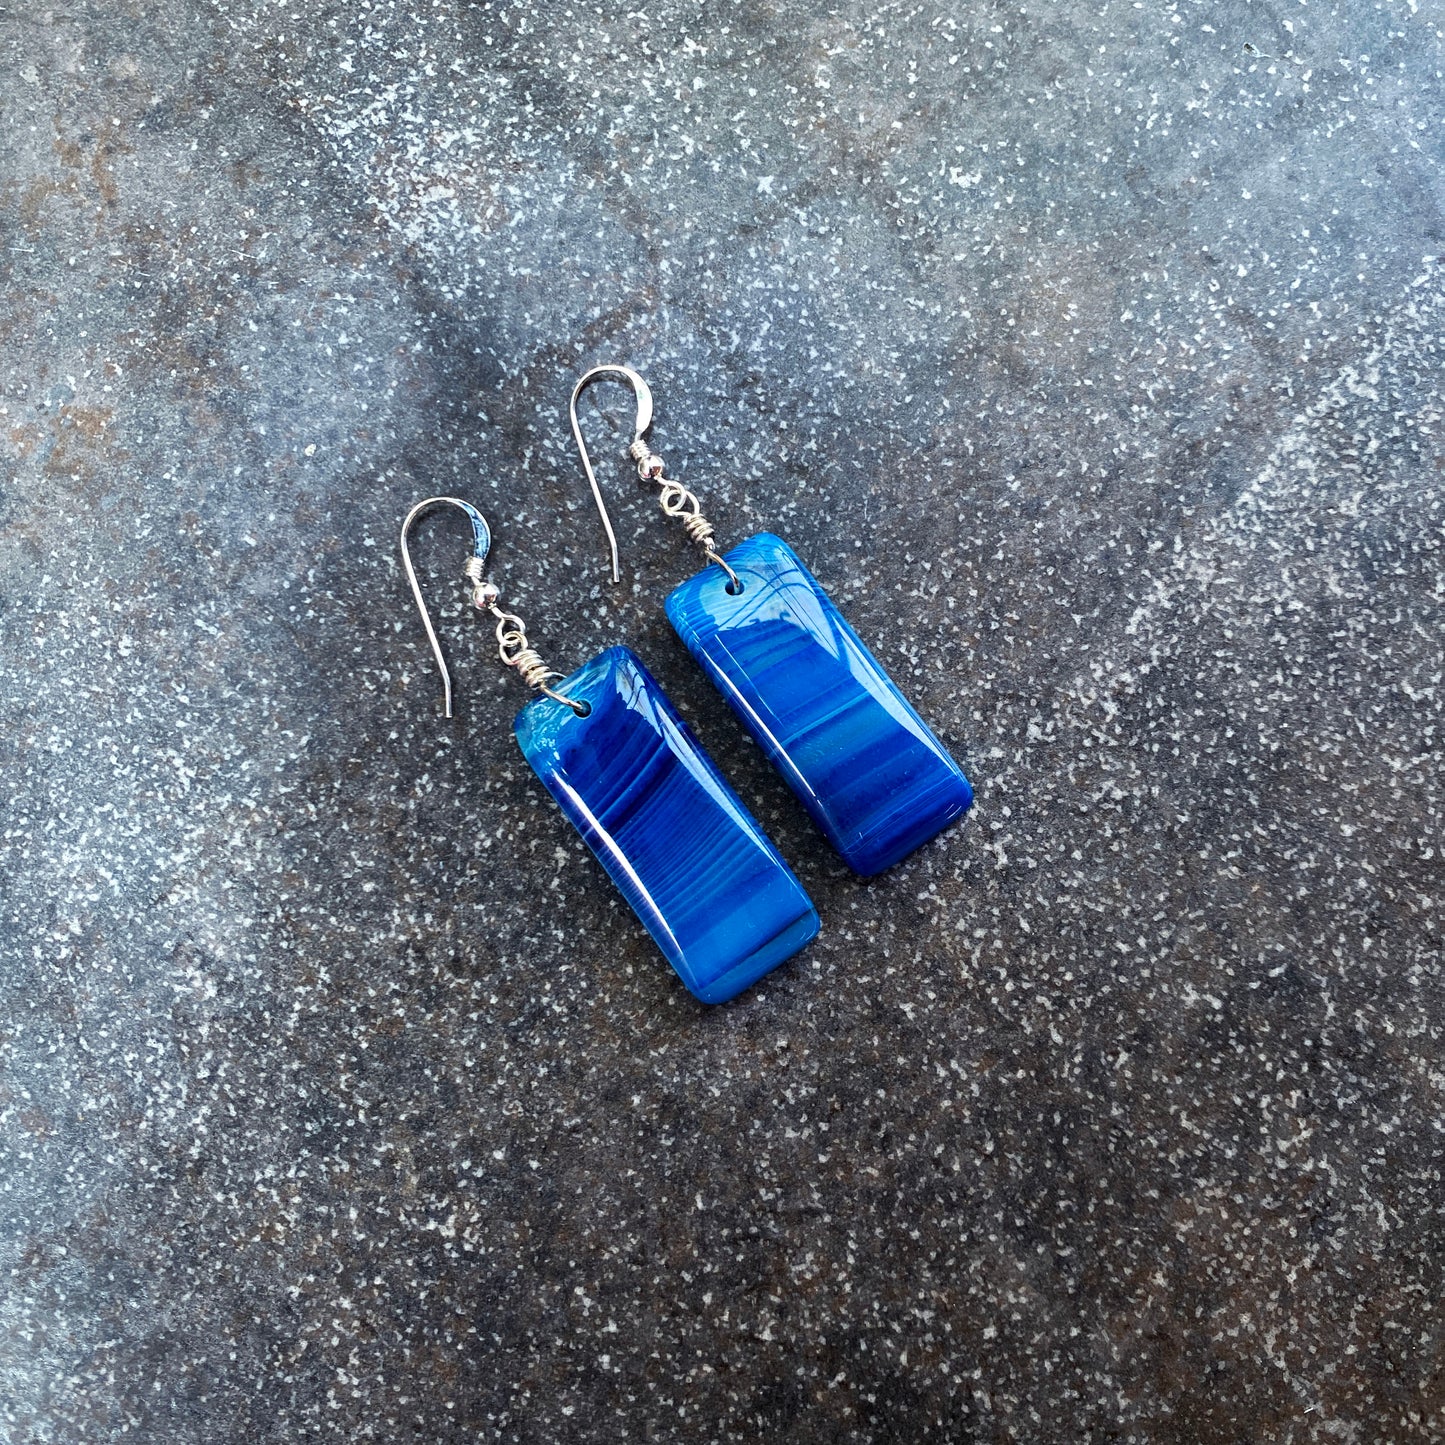 Blue Agate Drop Earrings Wrapped with Sterling Silver